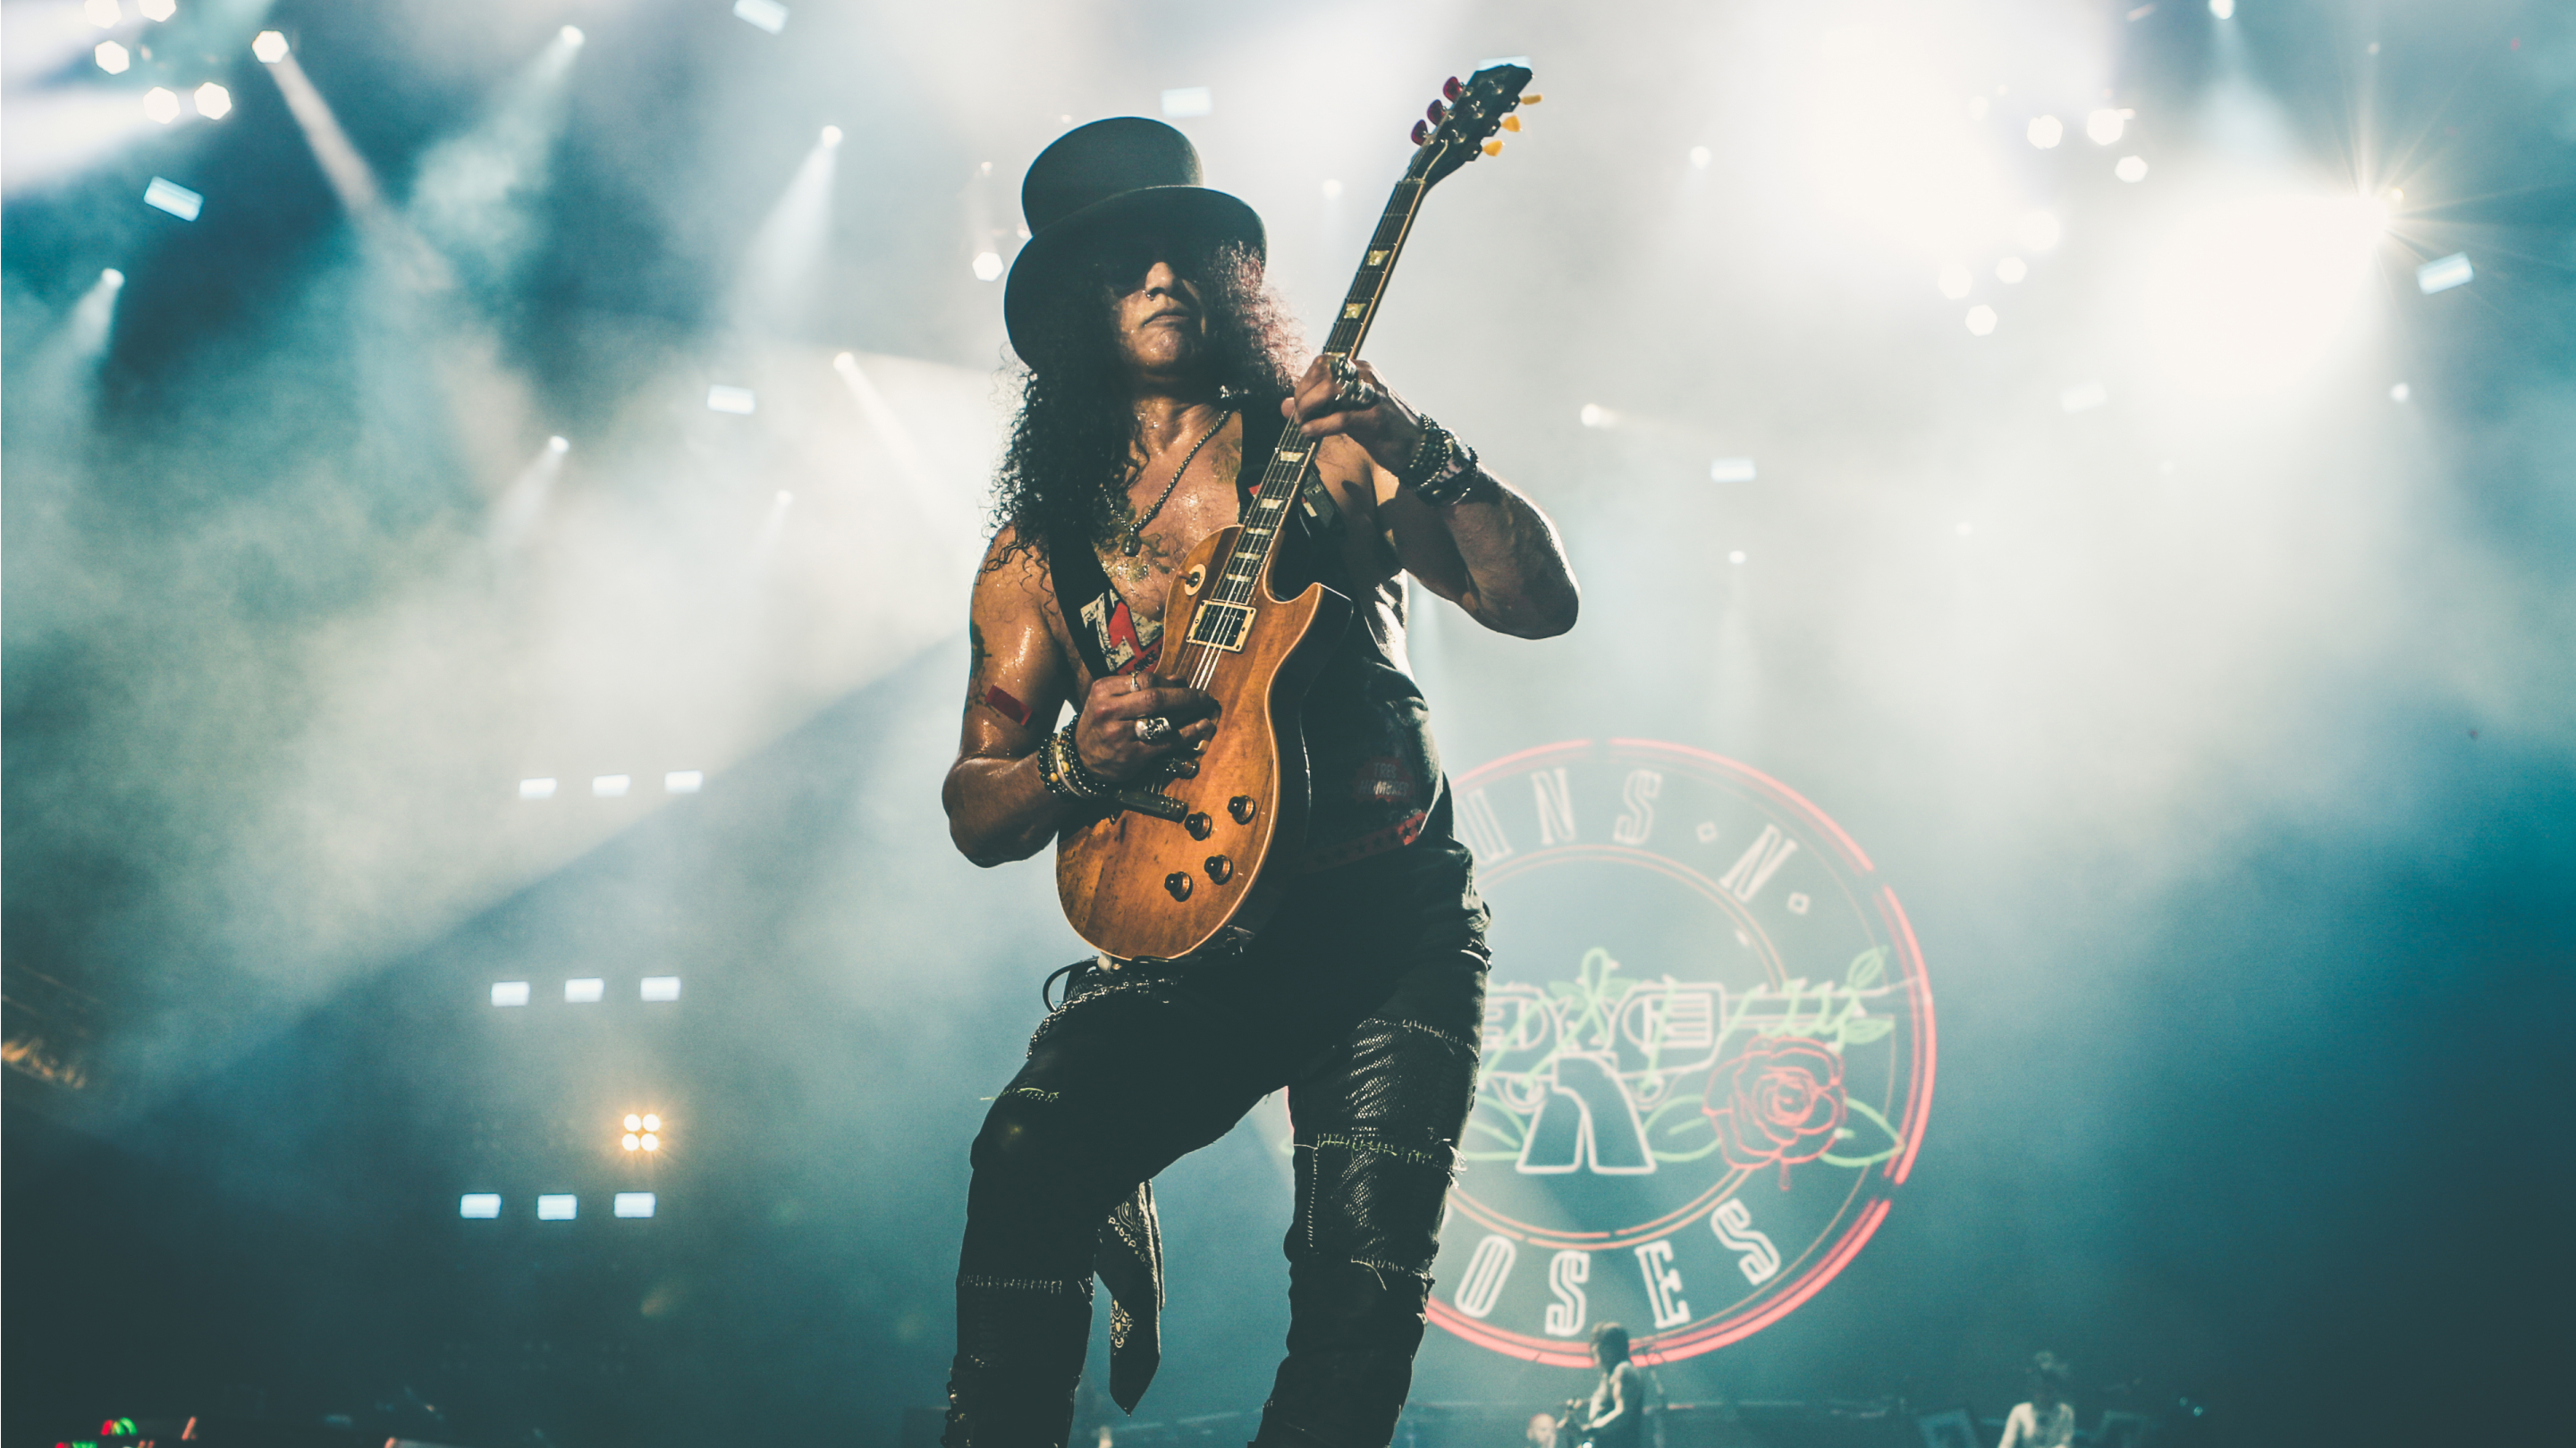 Slash playing guitar on stage for Guns 'n' Roses